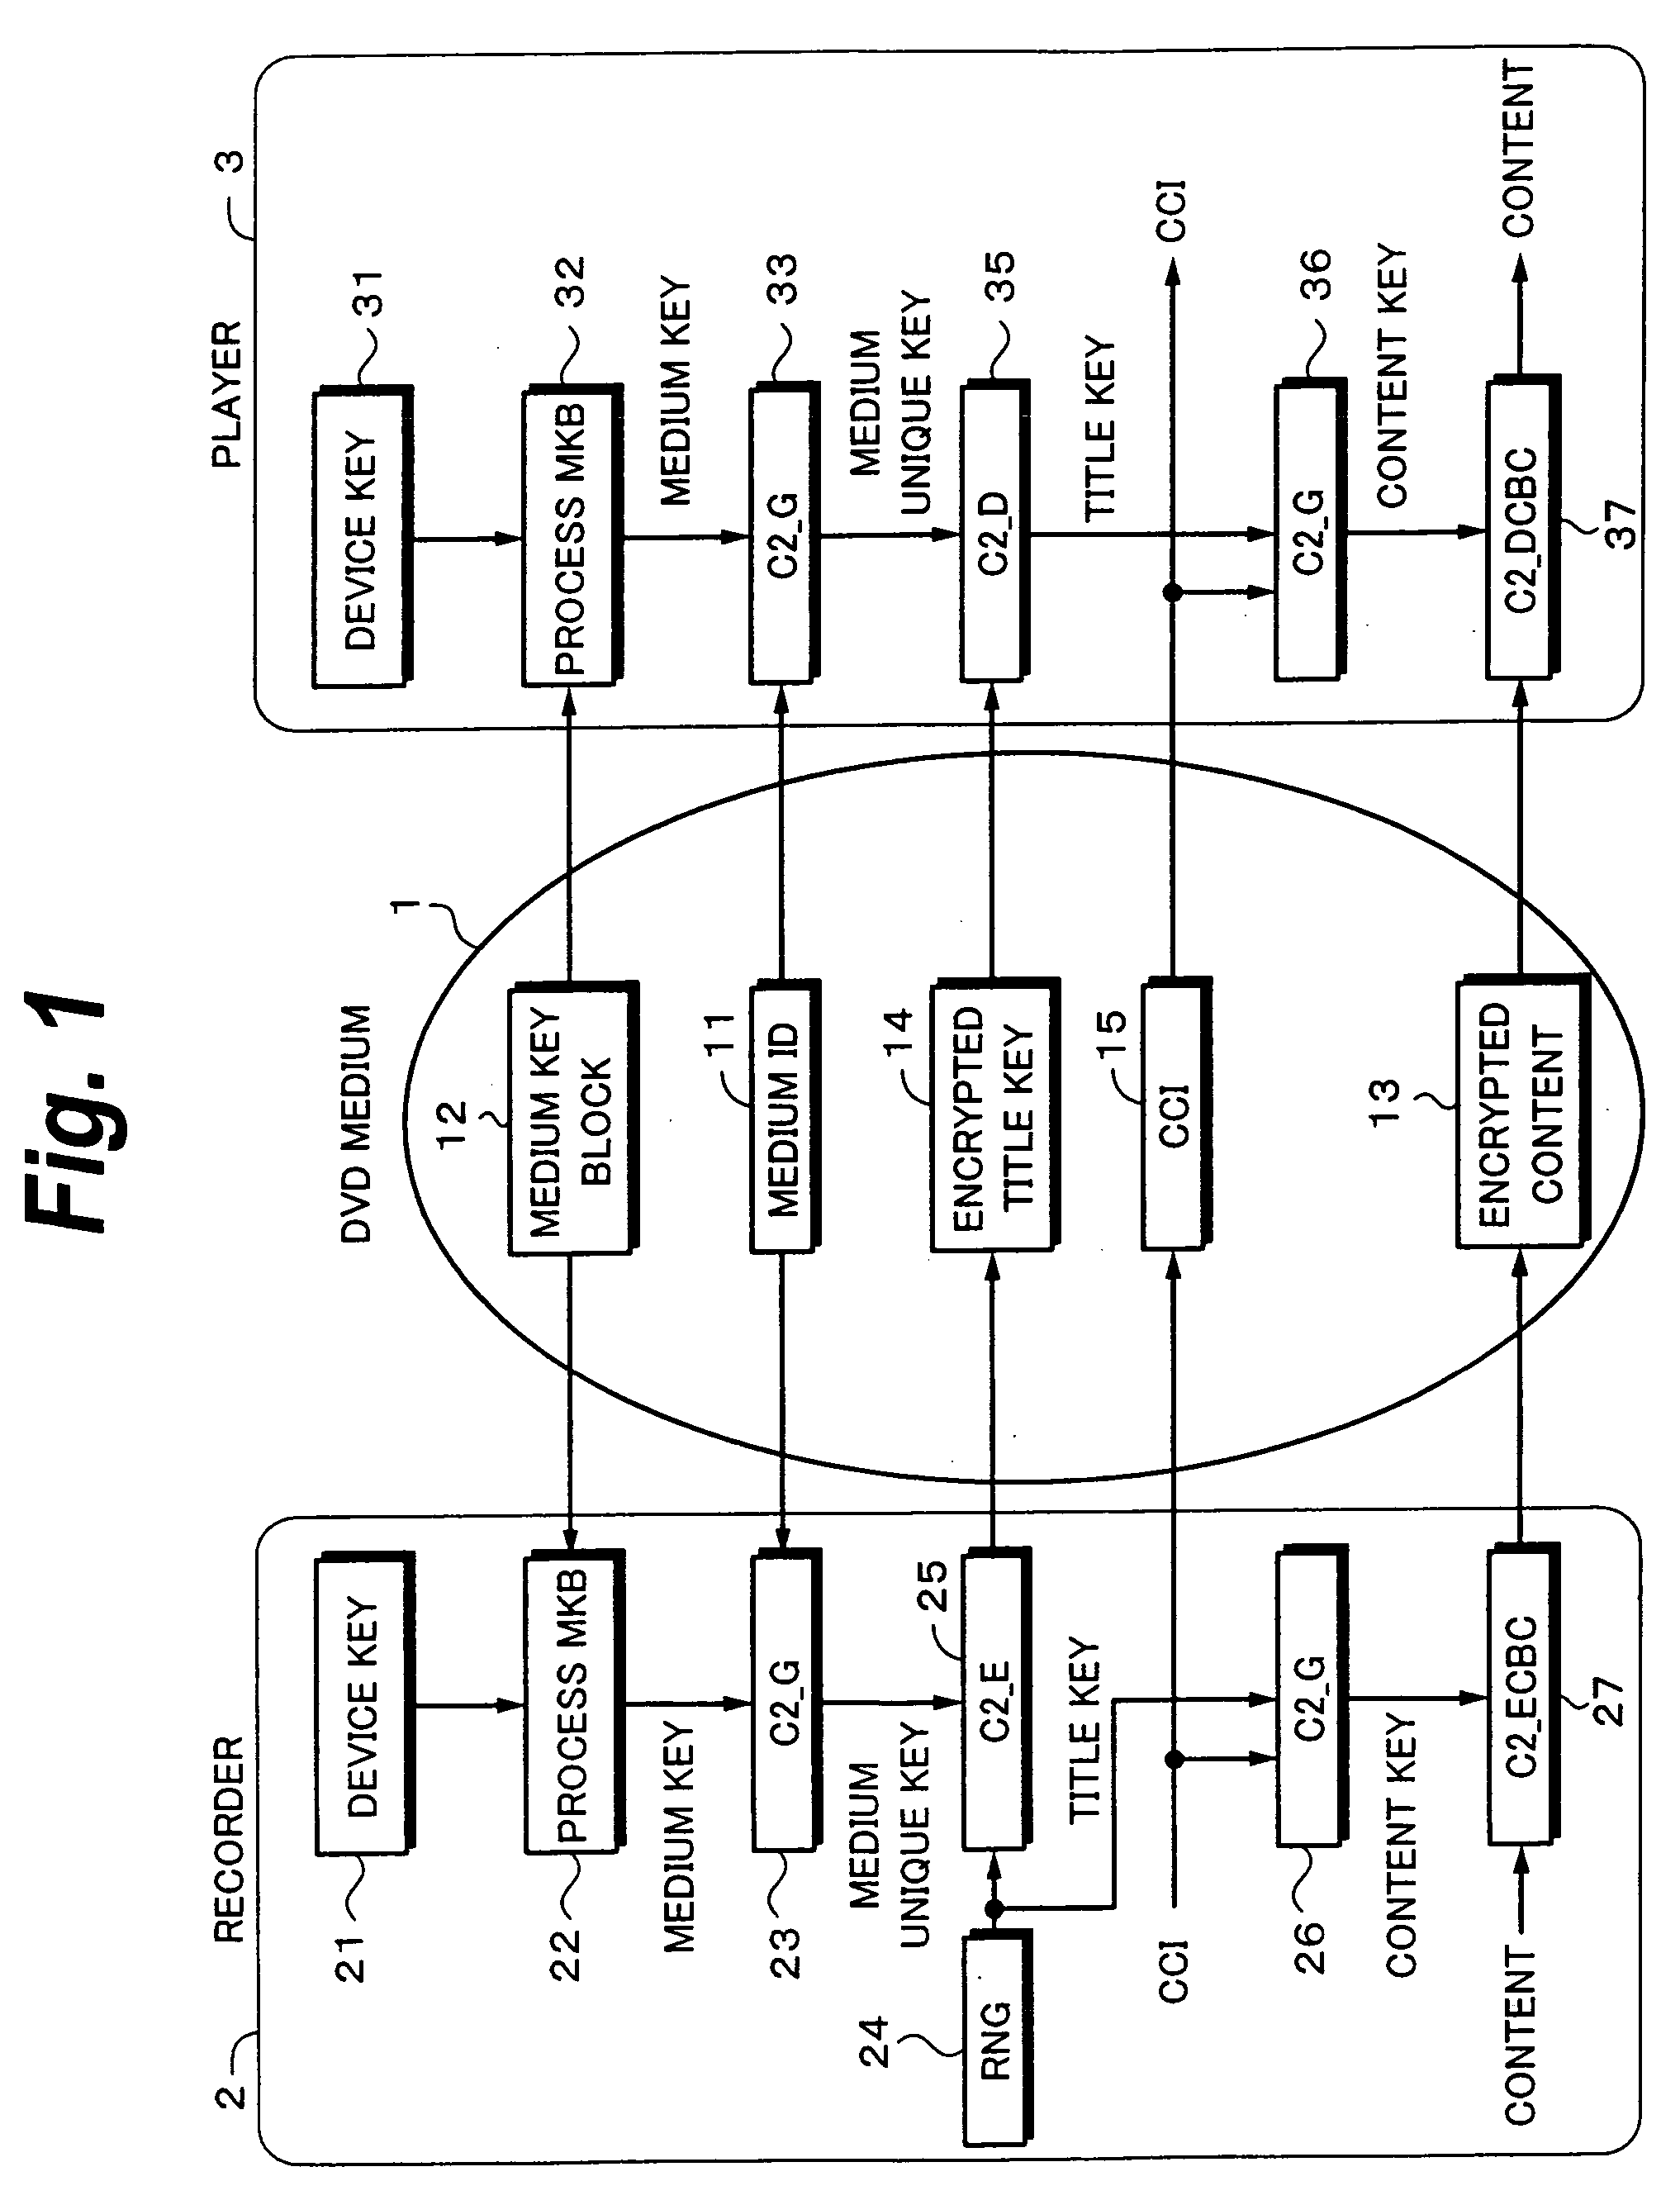 Recording/reproduction device, data processing device, and recording/reproduction system